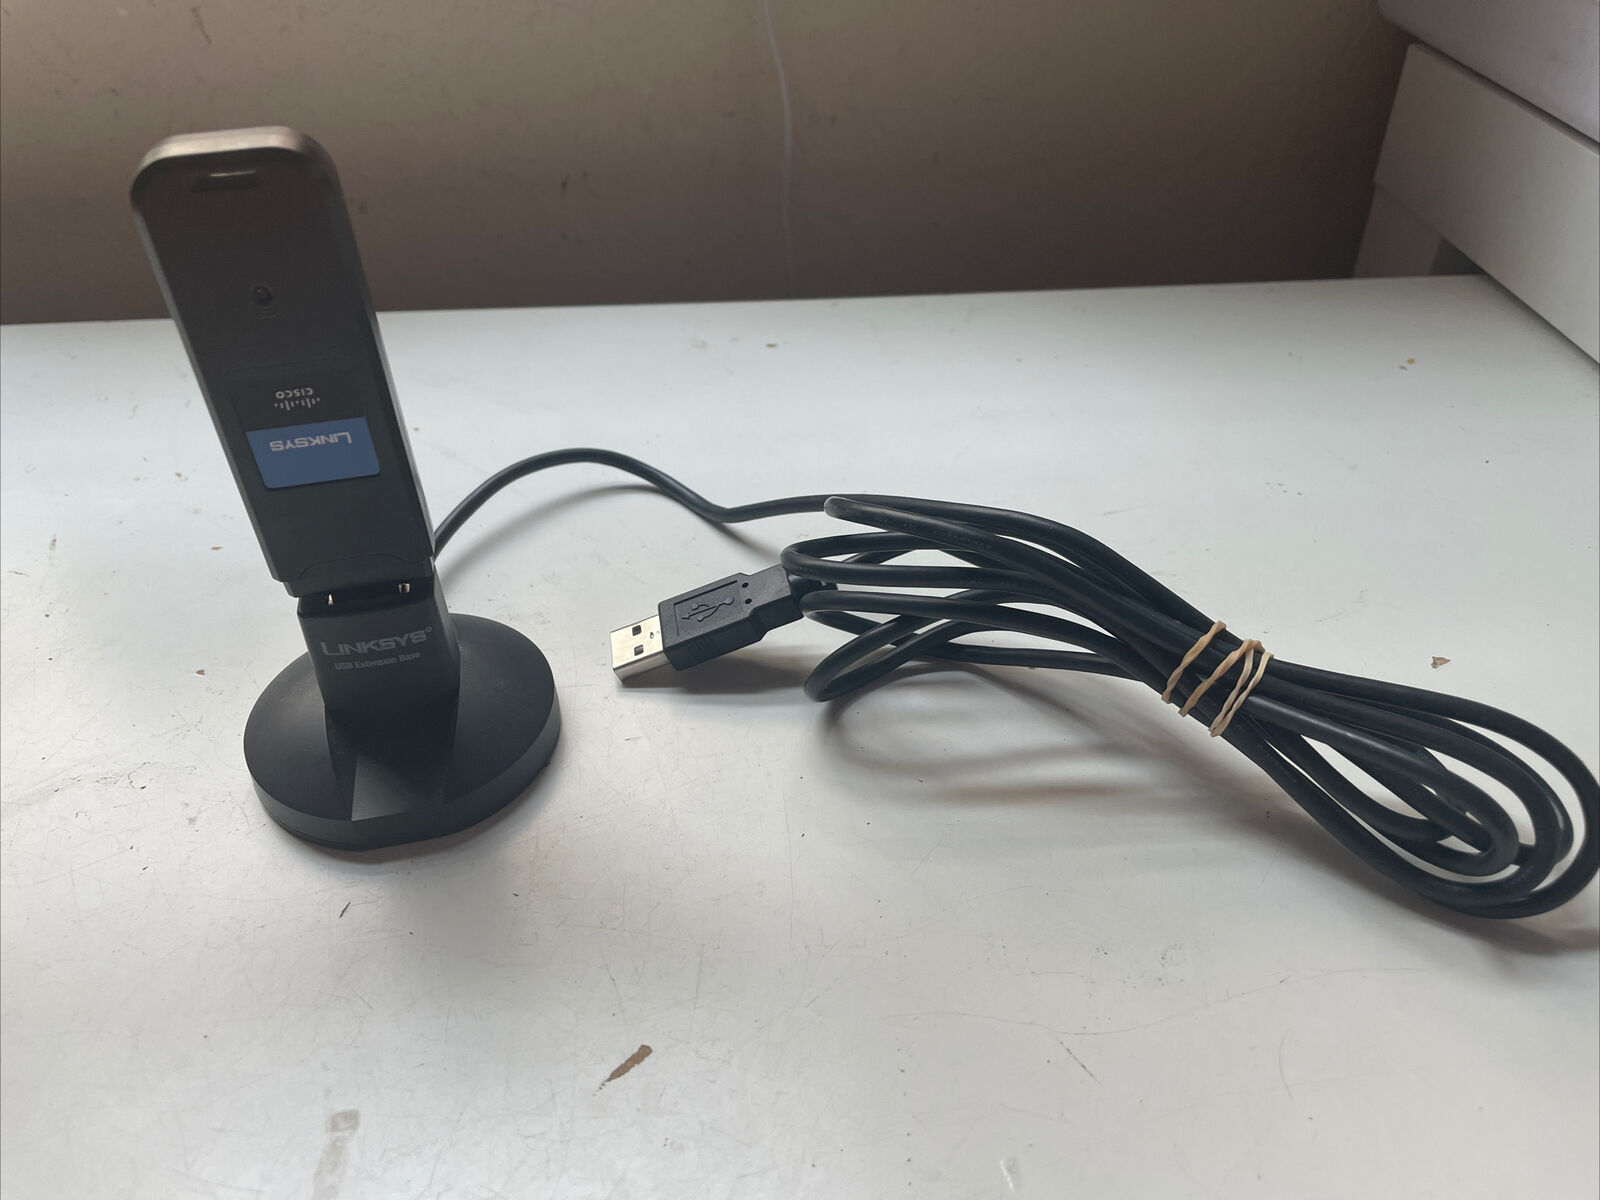 Cisco Linksys WUSB600N Dual-Band USB Wireless-N Network Adapter With Cradle